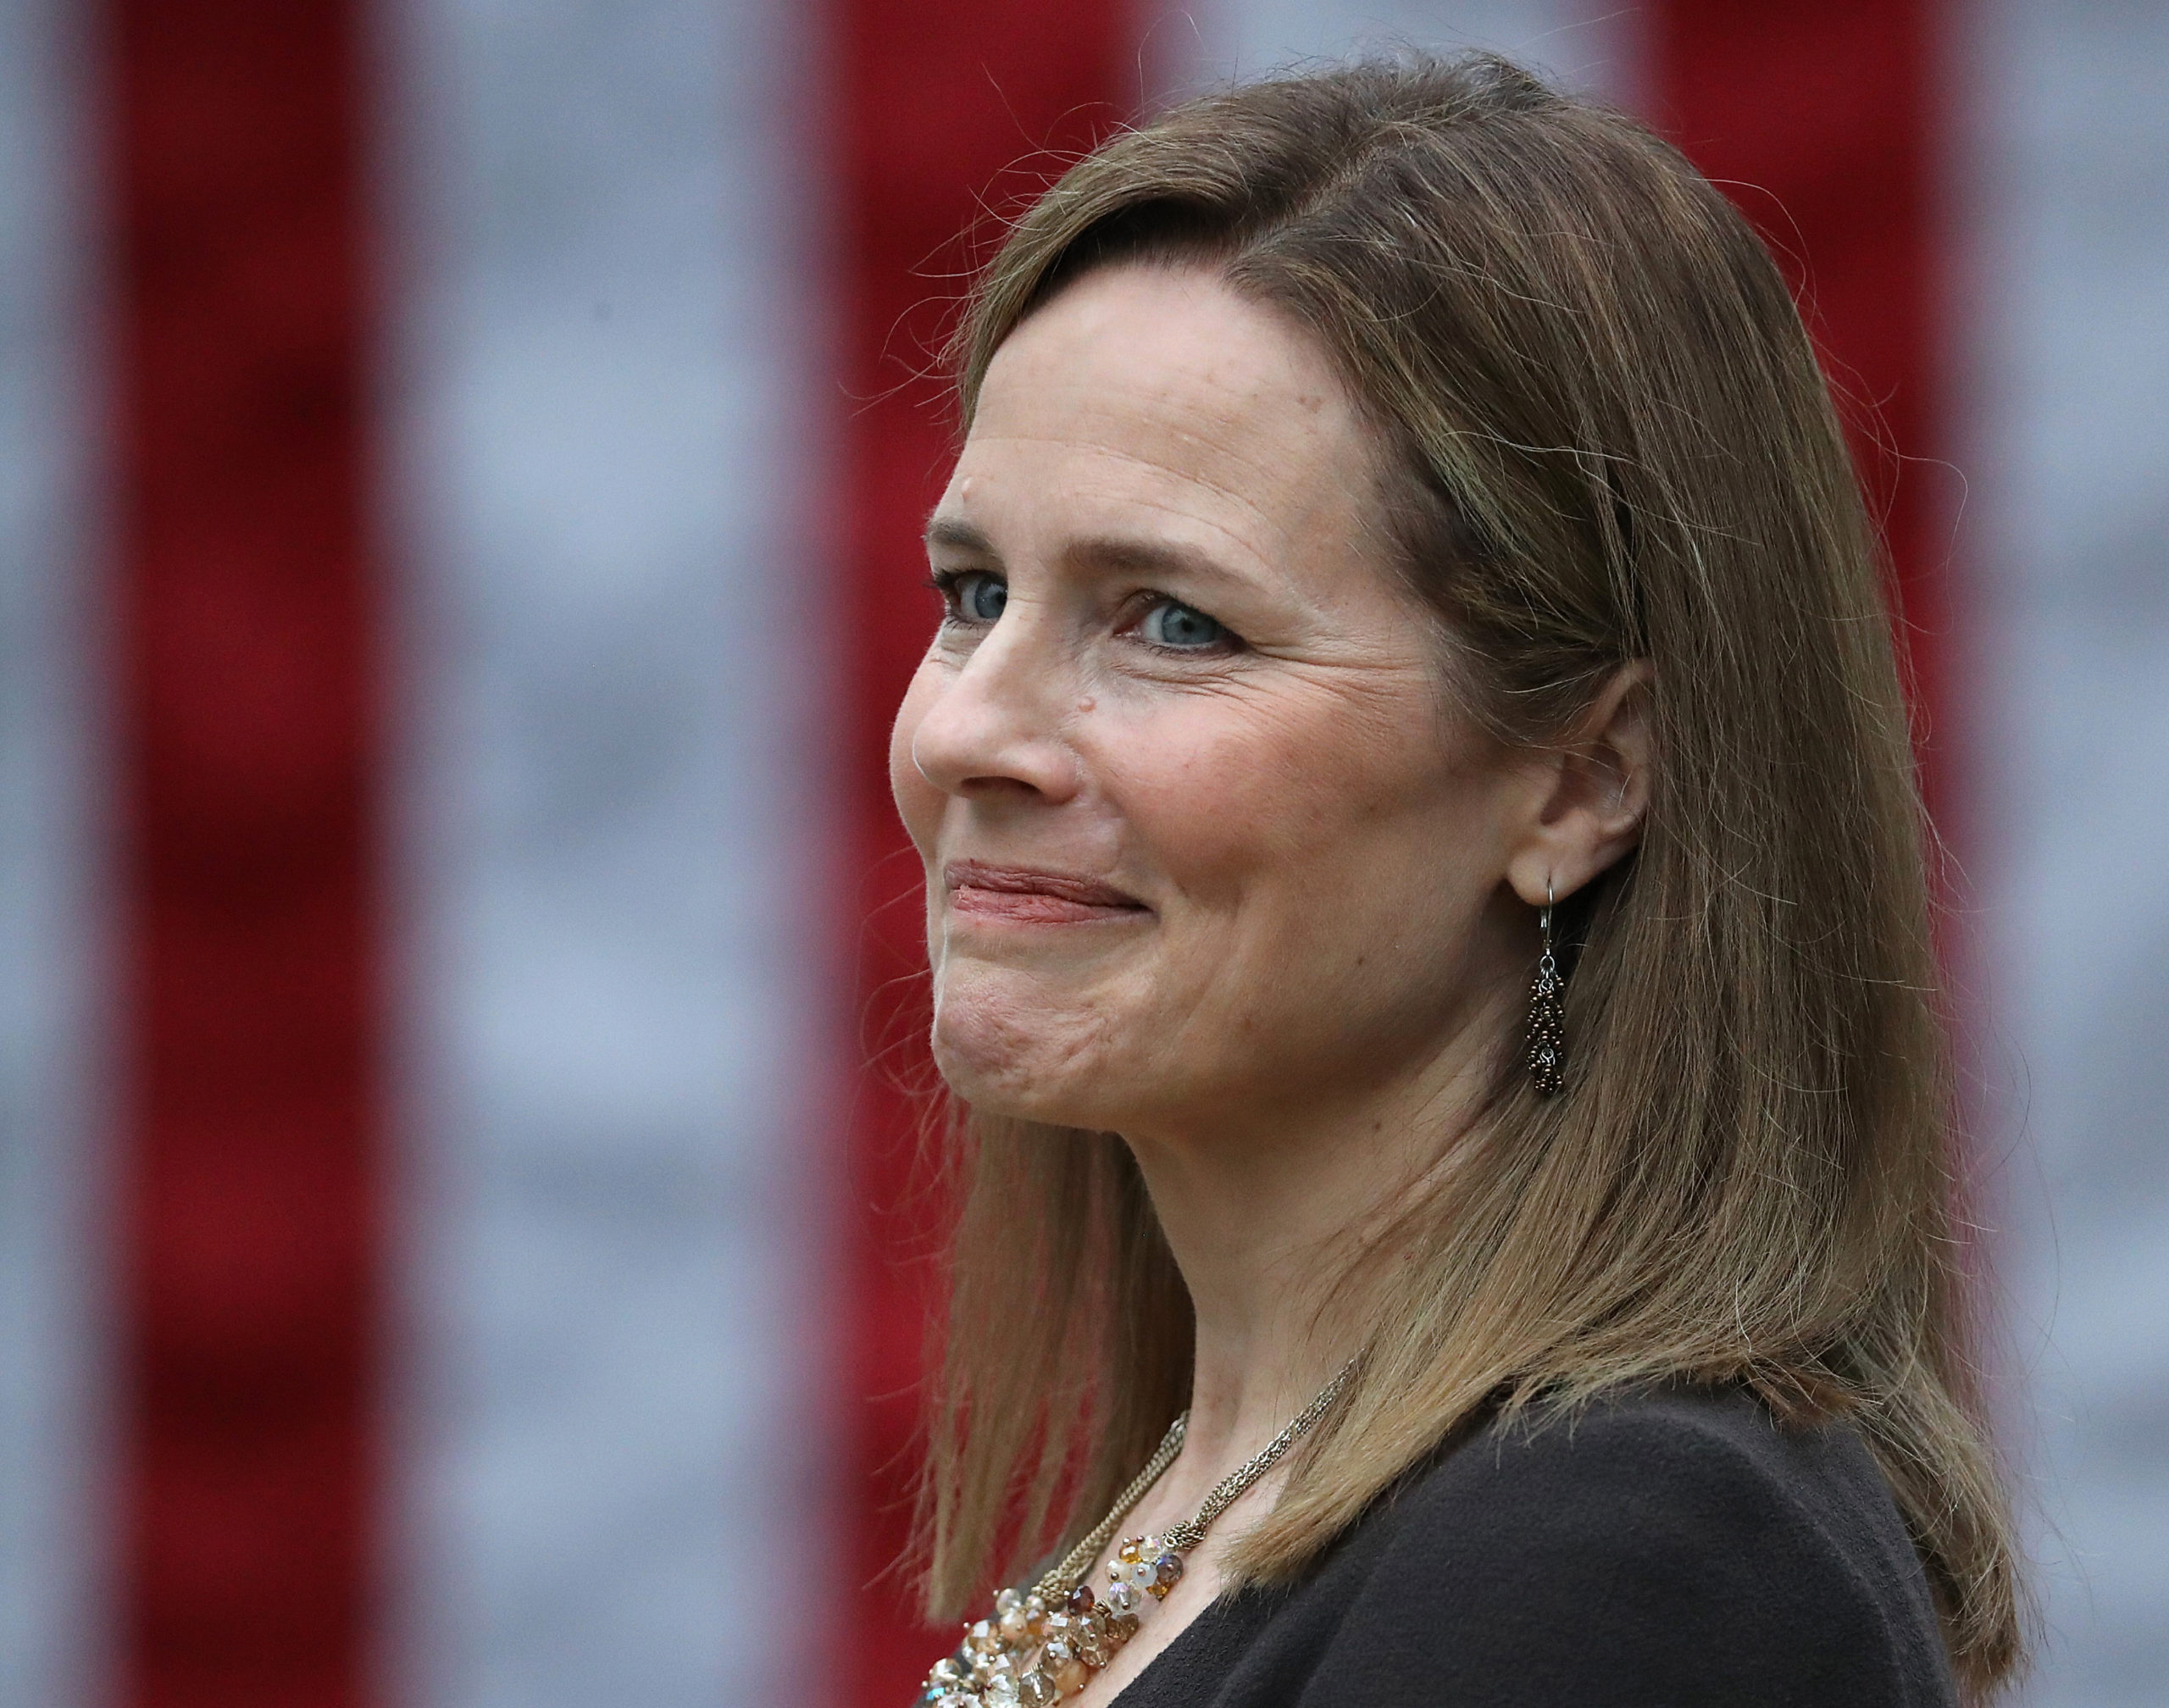 WASHINGTON, DC - SEPTEMBER 26: Seventh U.S. Circuit Court Judge Amy Coney Barrett looks on while being introduced by U.S. President Donald Trump as his nominee to the Supreme Court during an event in the Rose Garden at the White House September 26, 2020 in Washington, DC. With 38 days until the election, Trump tapped Barrett to be his third Supreme Court nominee in just four years and to replace the late Associate Justice Ruth Bader Ginsburg, who will be buried at Arlington National Cemetery on Tuesday. (Photo by Chip Somodevilla/Getty Images)